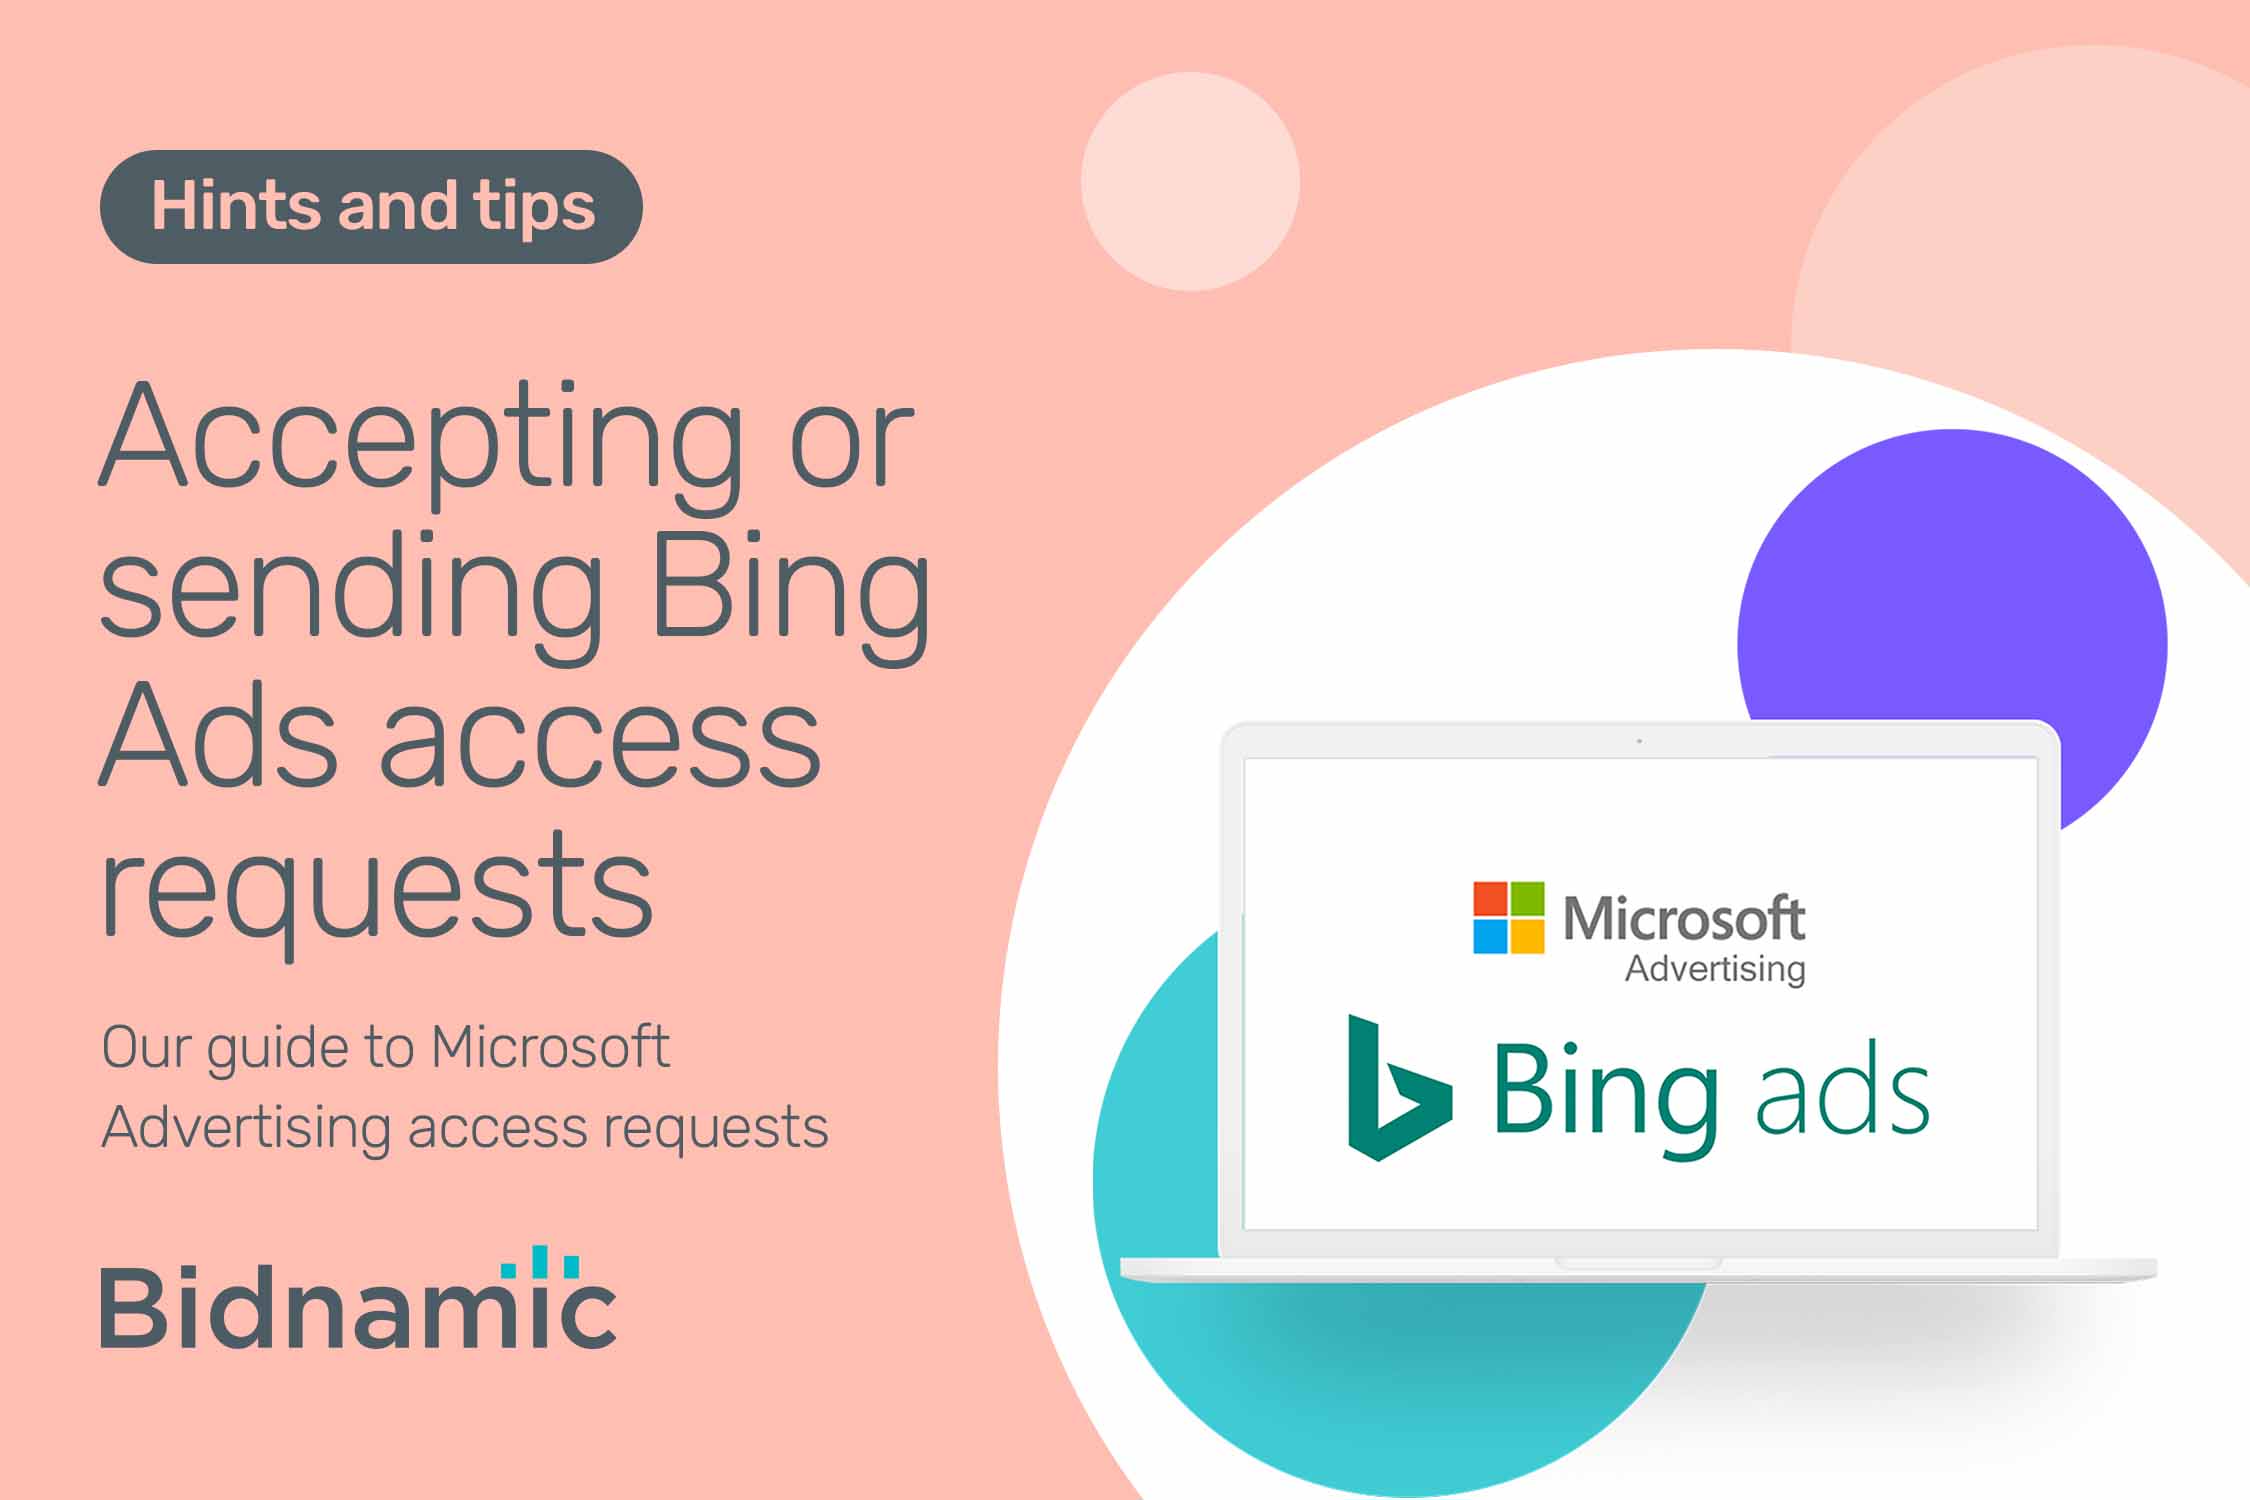 How to accept or send Bing Ads (Microsoft Advertising) access requests